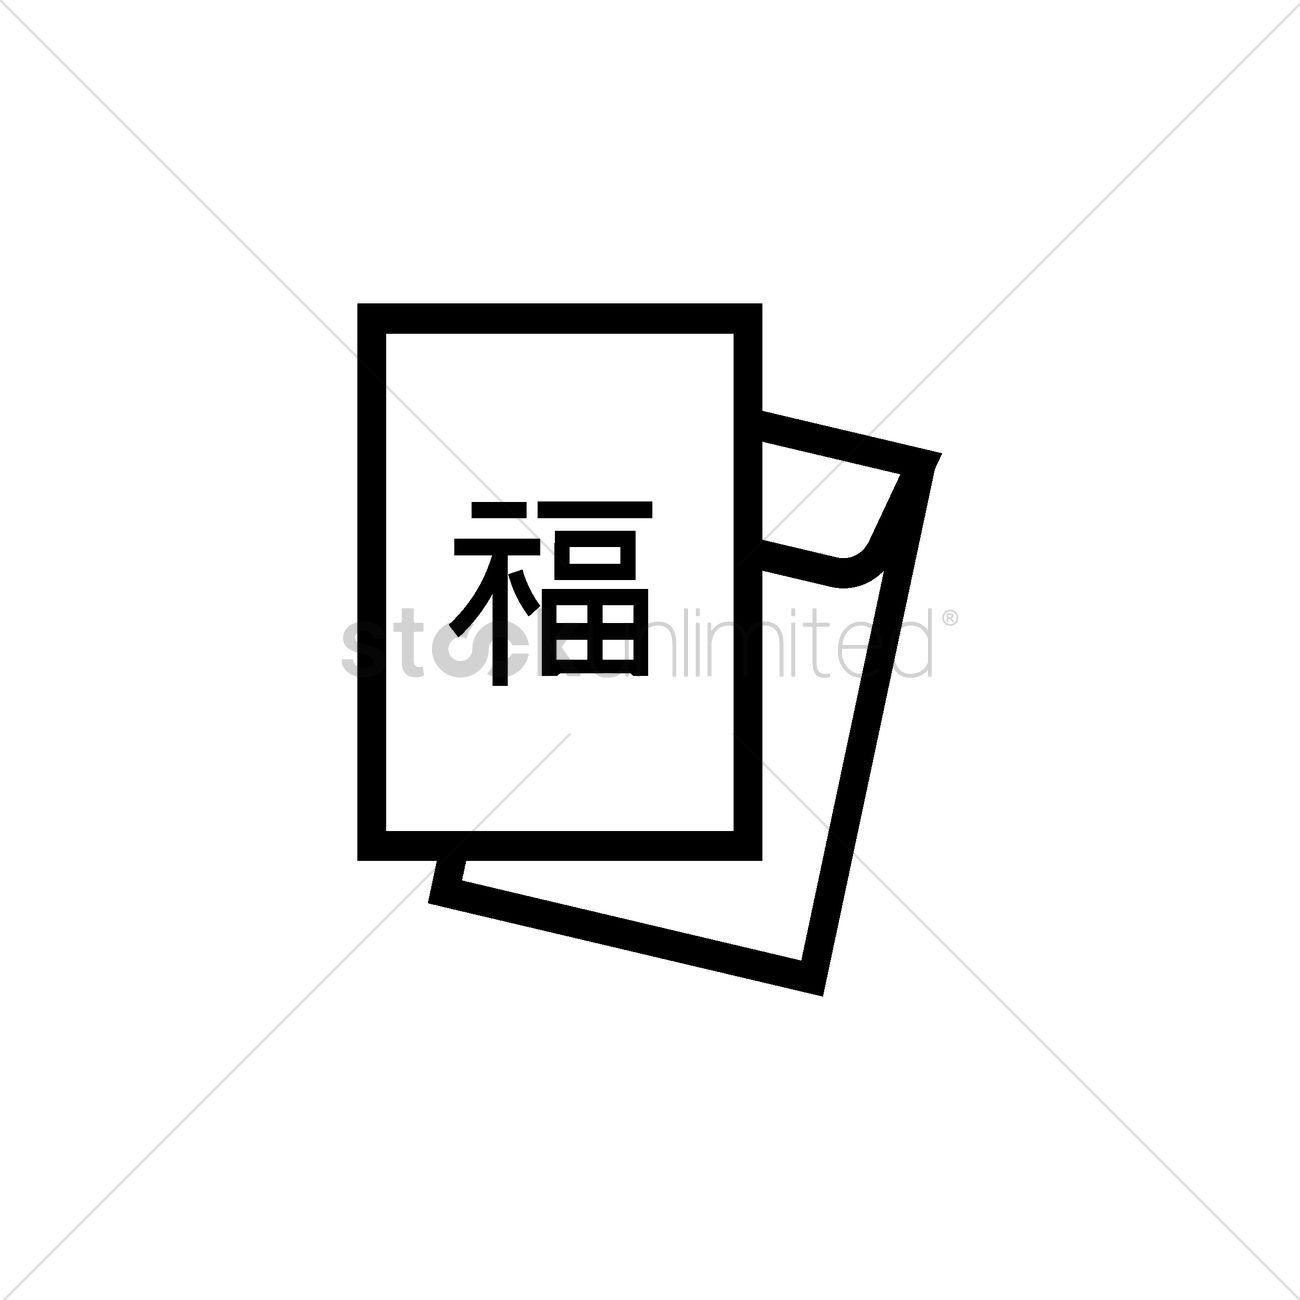 Red Envelope with White Logo - Chinese new year red envelope Vector Image - 1967448 | StockUnlimited